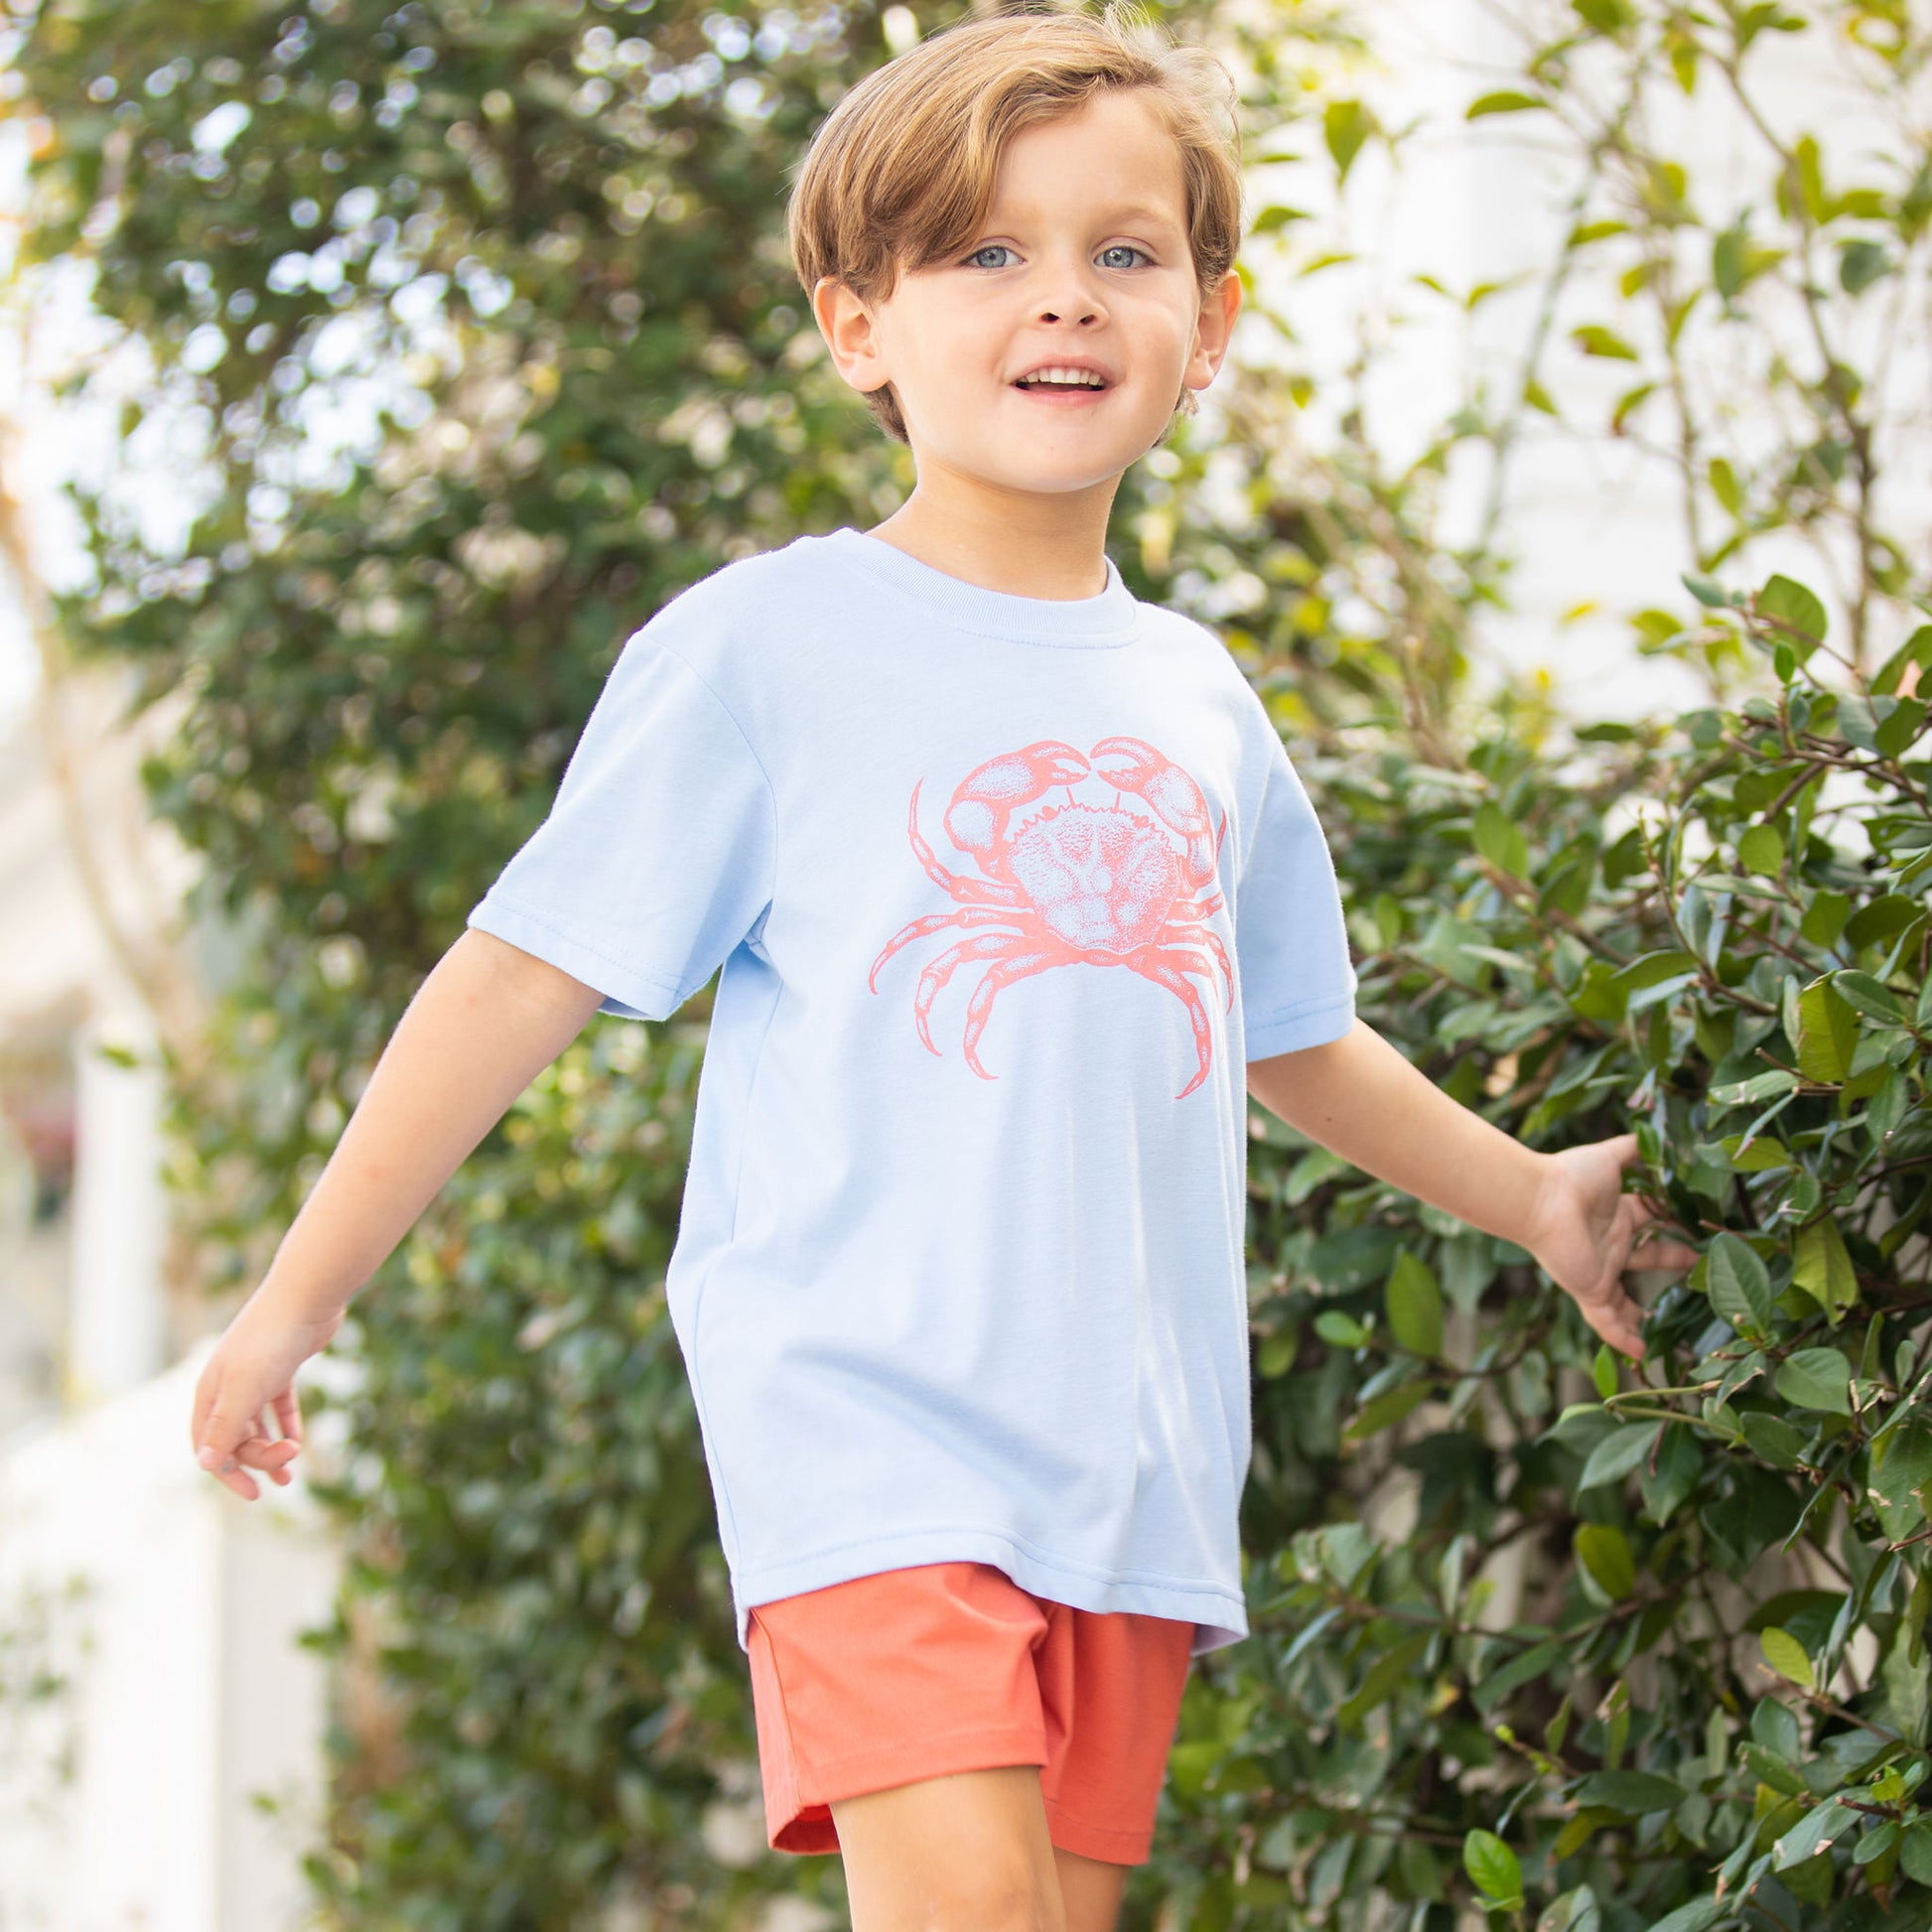 little boy wearing a Crab Graphic Tee walking down the sidewalk smiling